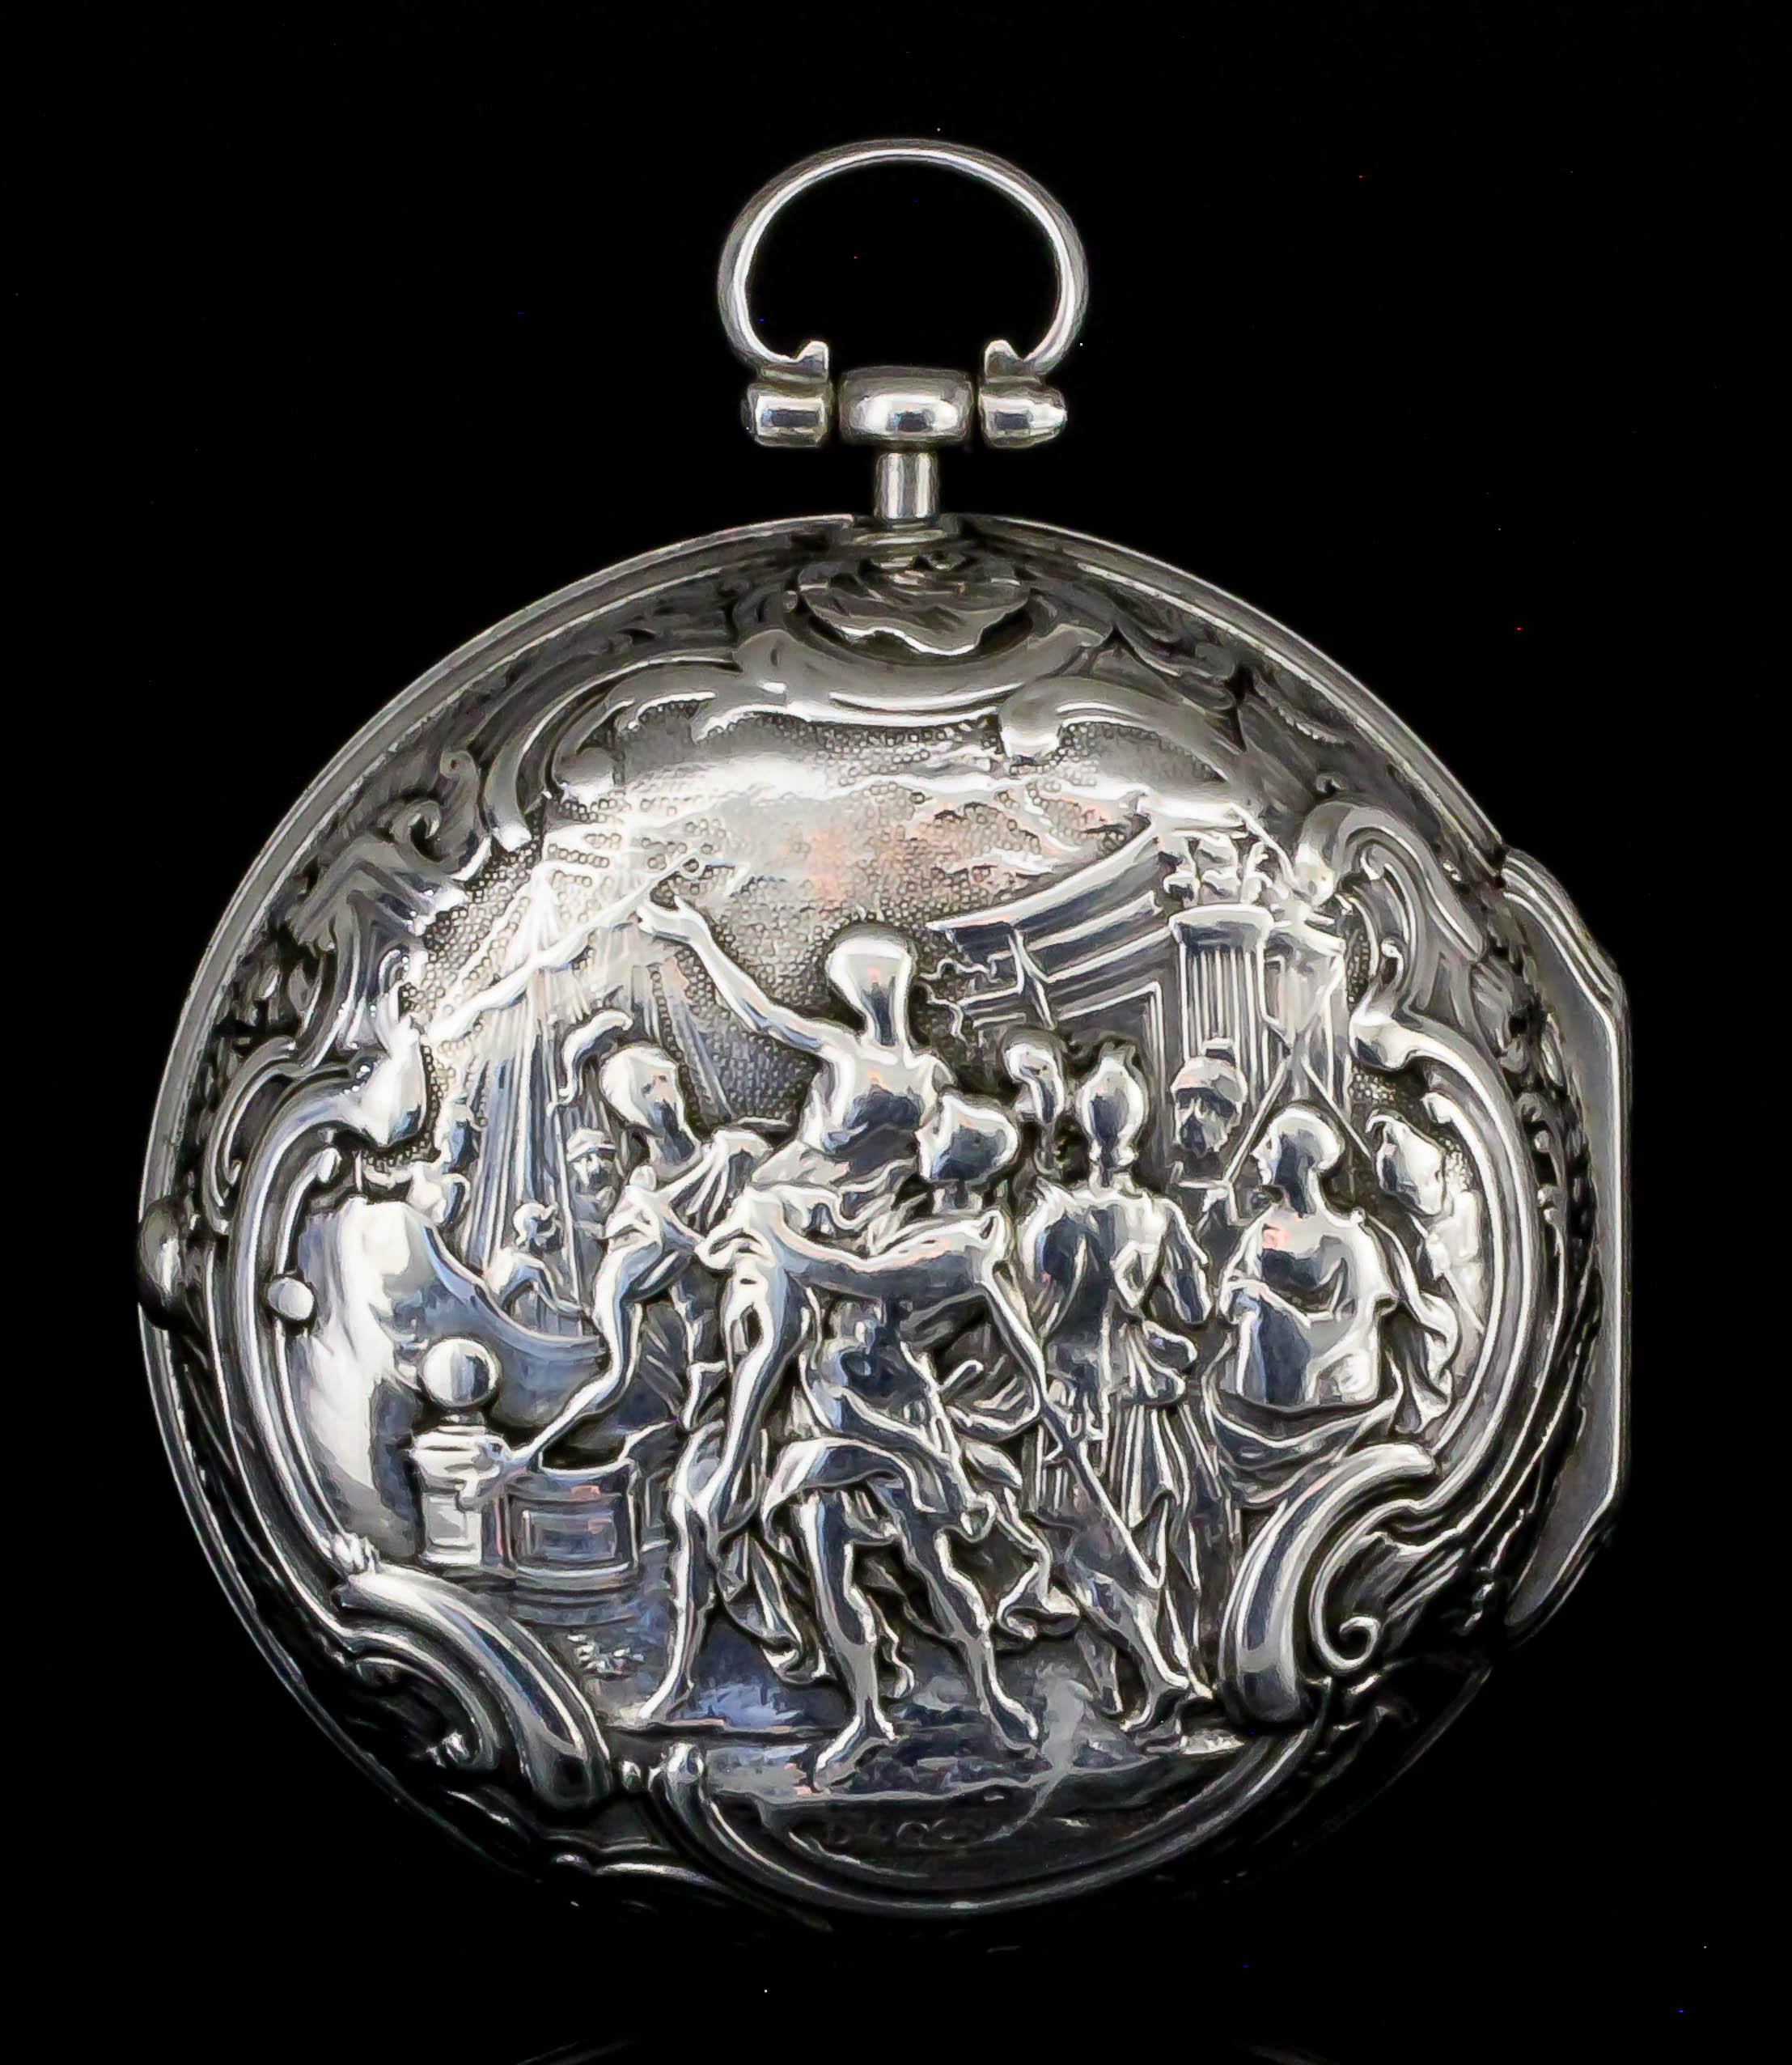 An unusual mid 18th Century silver pair cased verge pocket watch by William Gib of Rotterdam, No. - Image 2 of 5